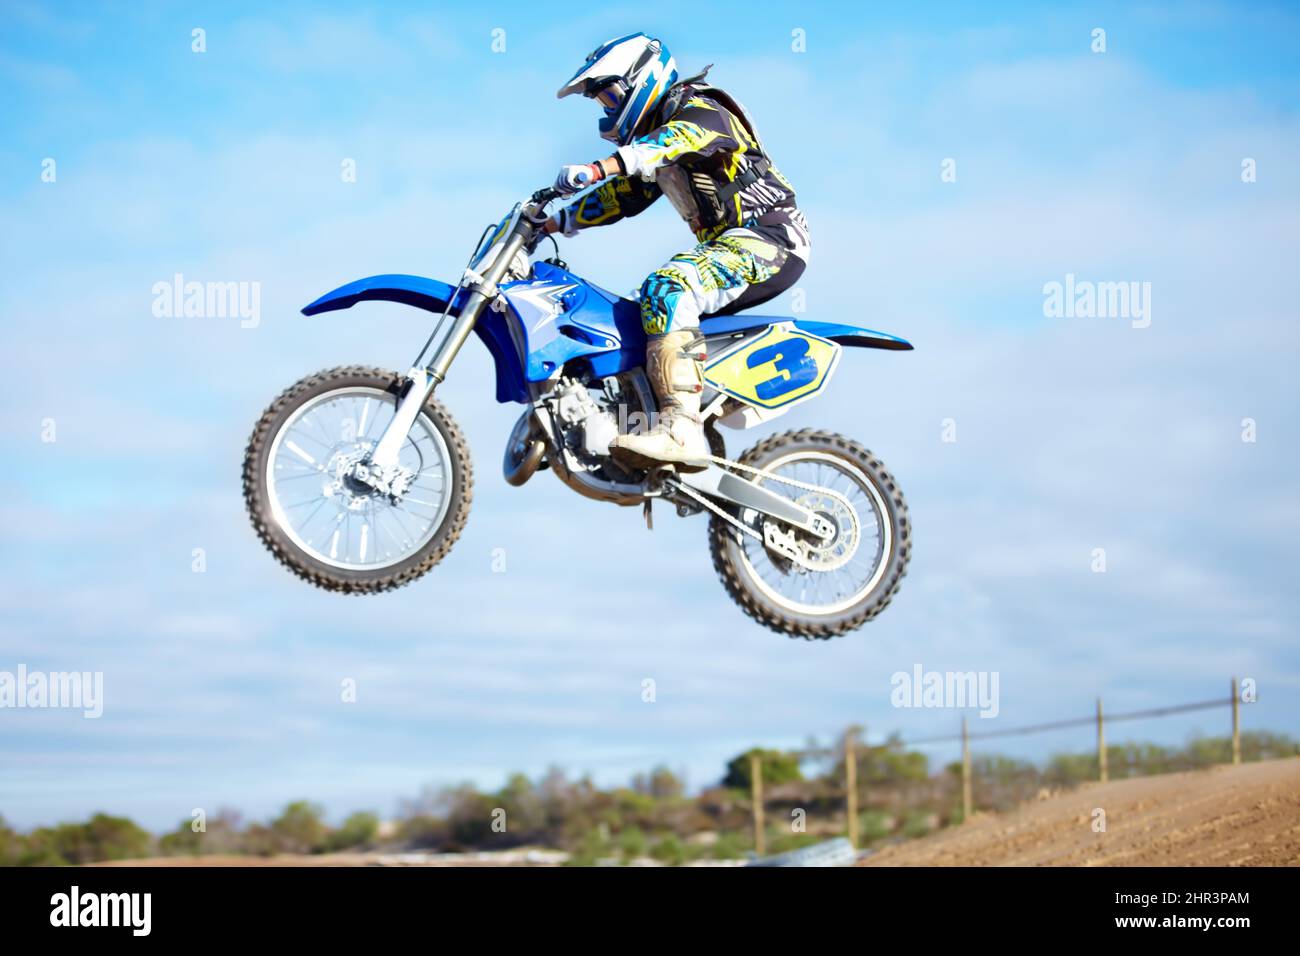 Hes a crowd pleaser. A motocross rider in the air during a jump. Stock Photo